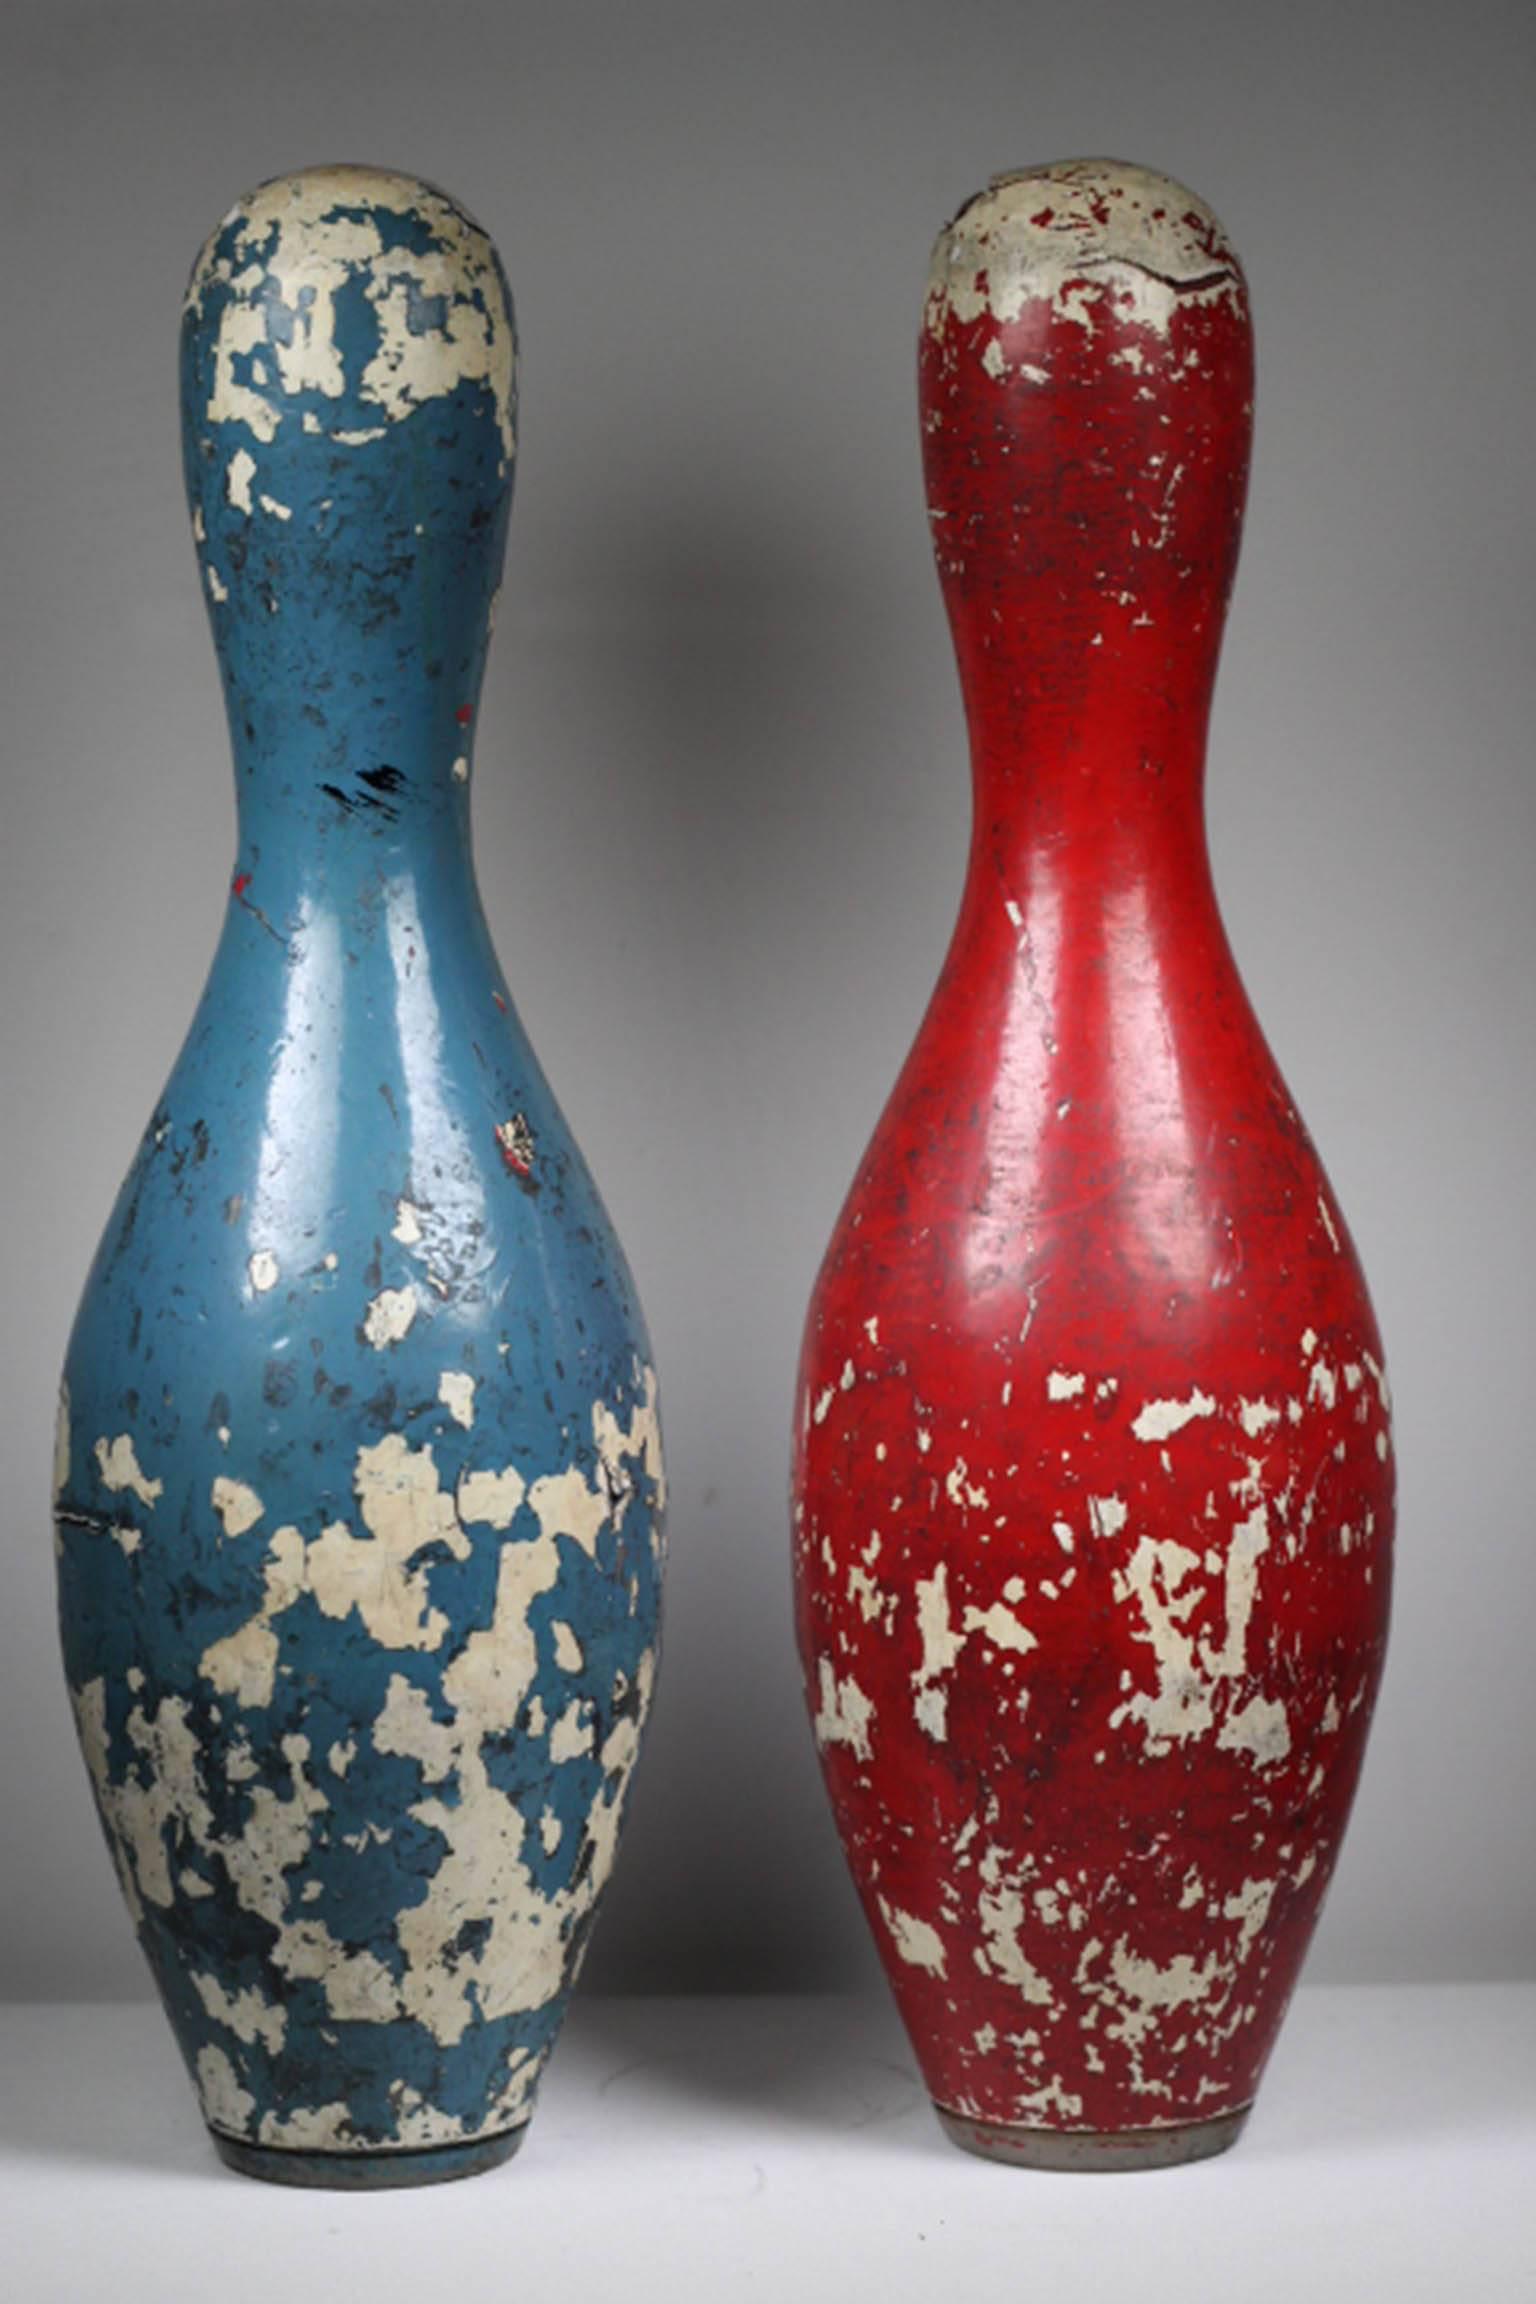 Beautifully distressed pair of vintage wooden bowling pins.